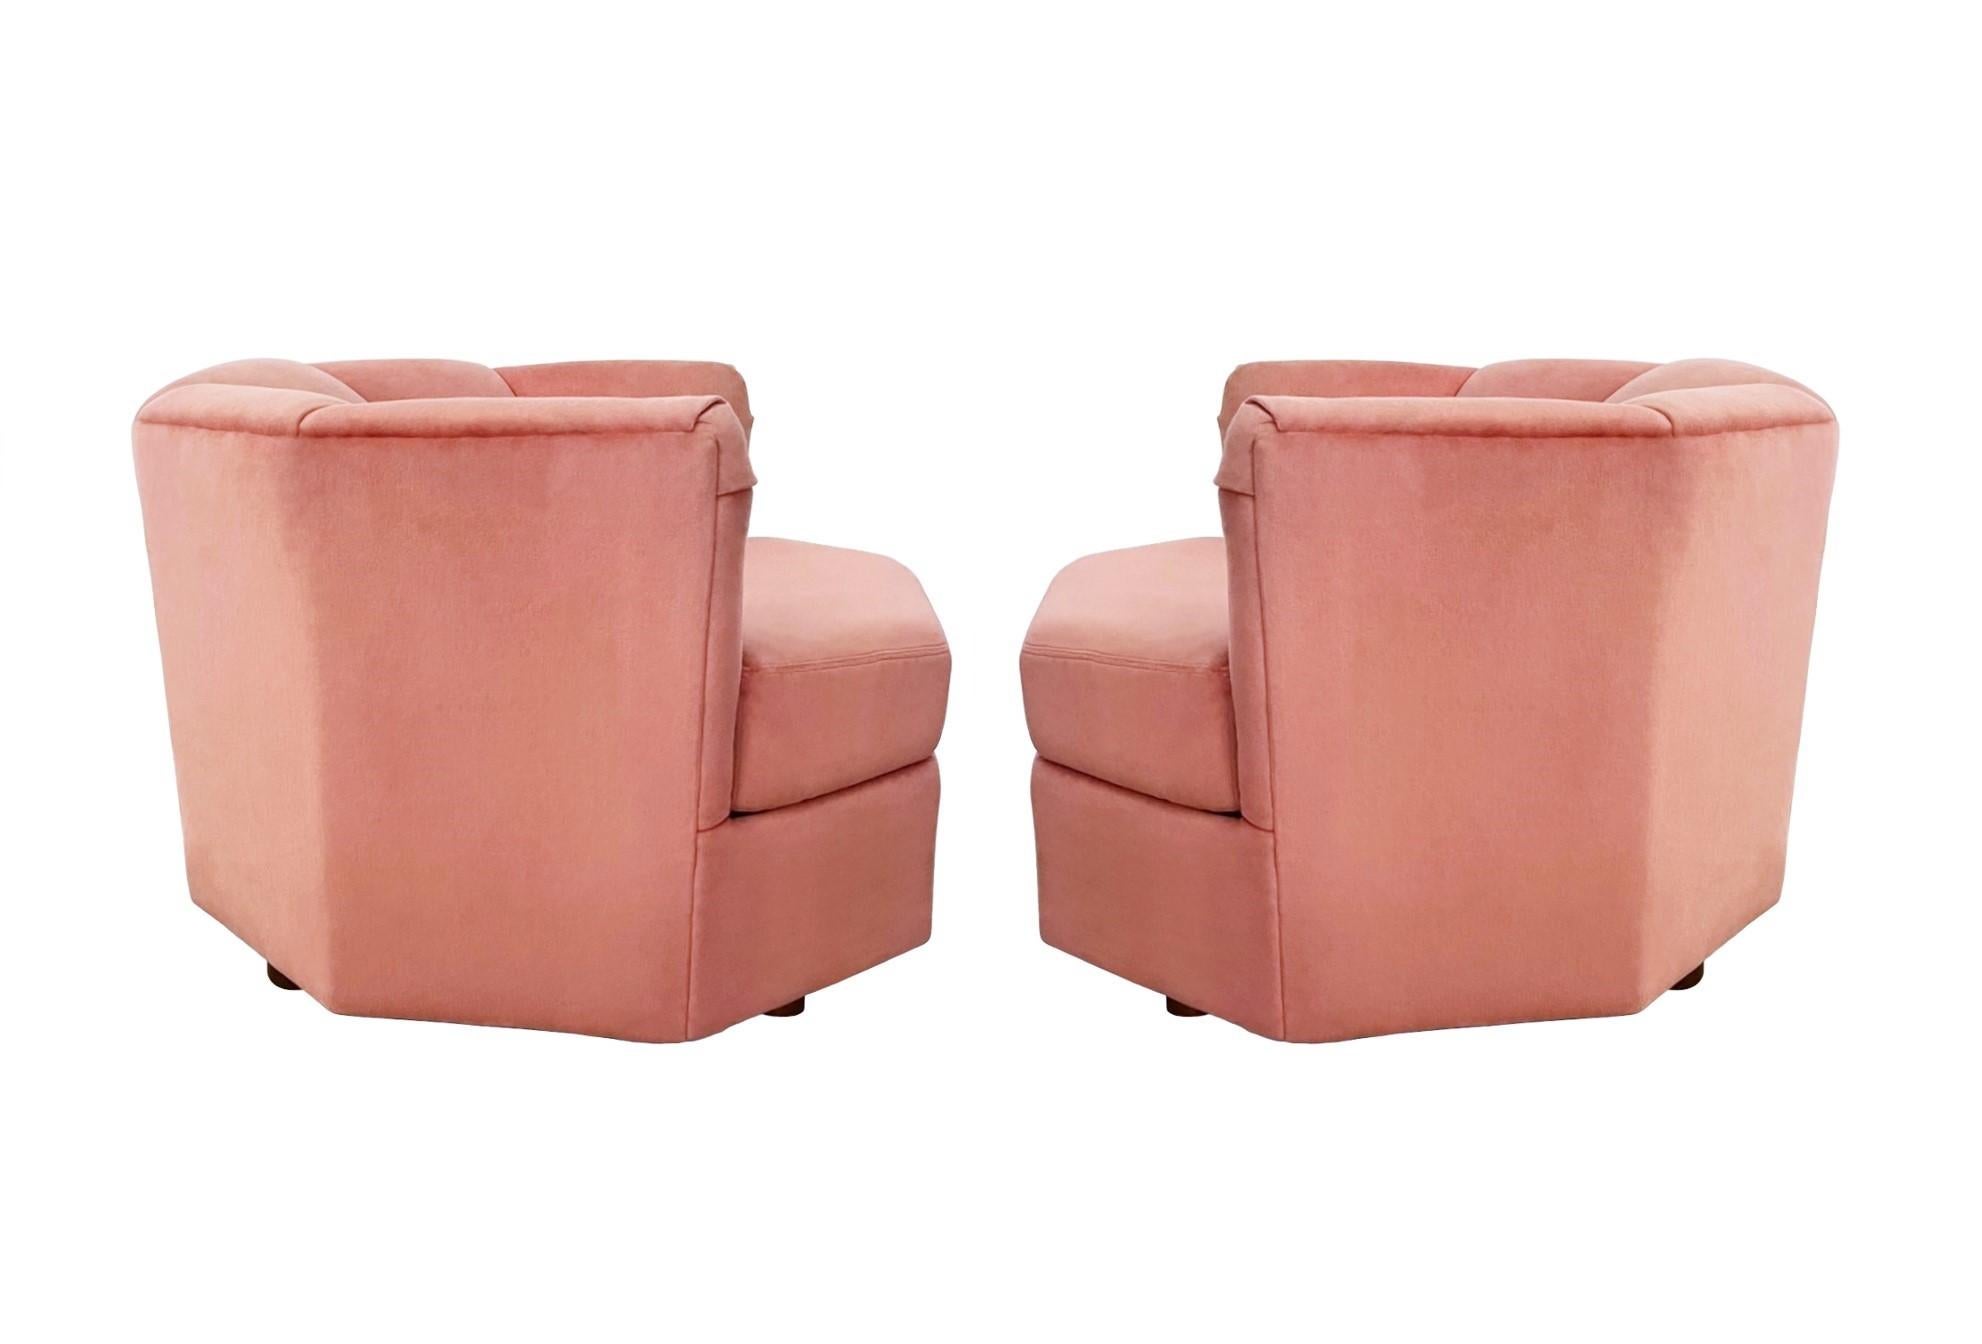 1970s Hexagonal Club Chairs in a Dusty Rose Velvet For Sale 4